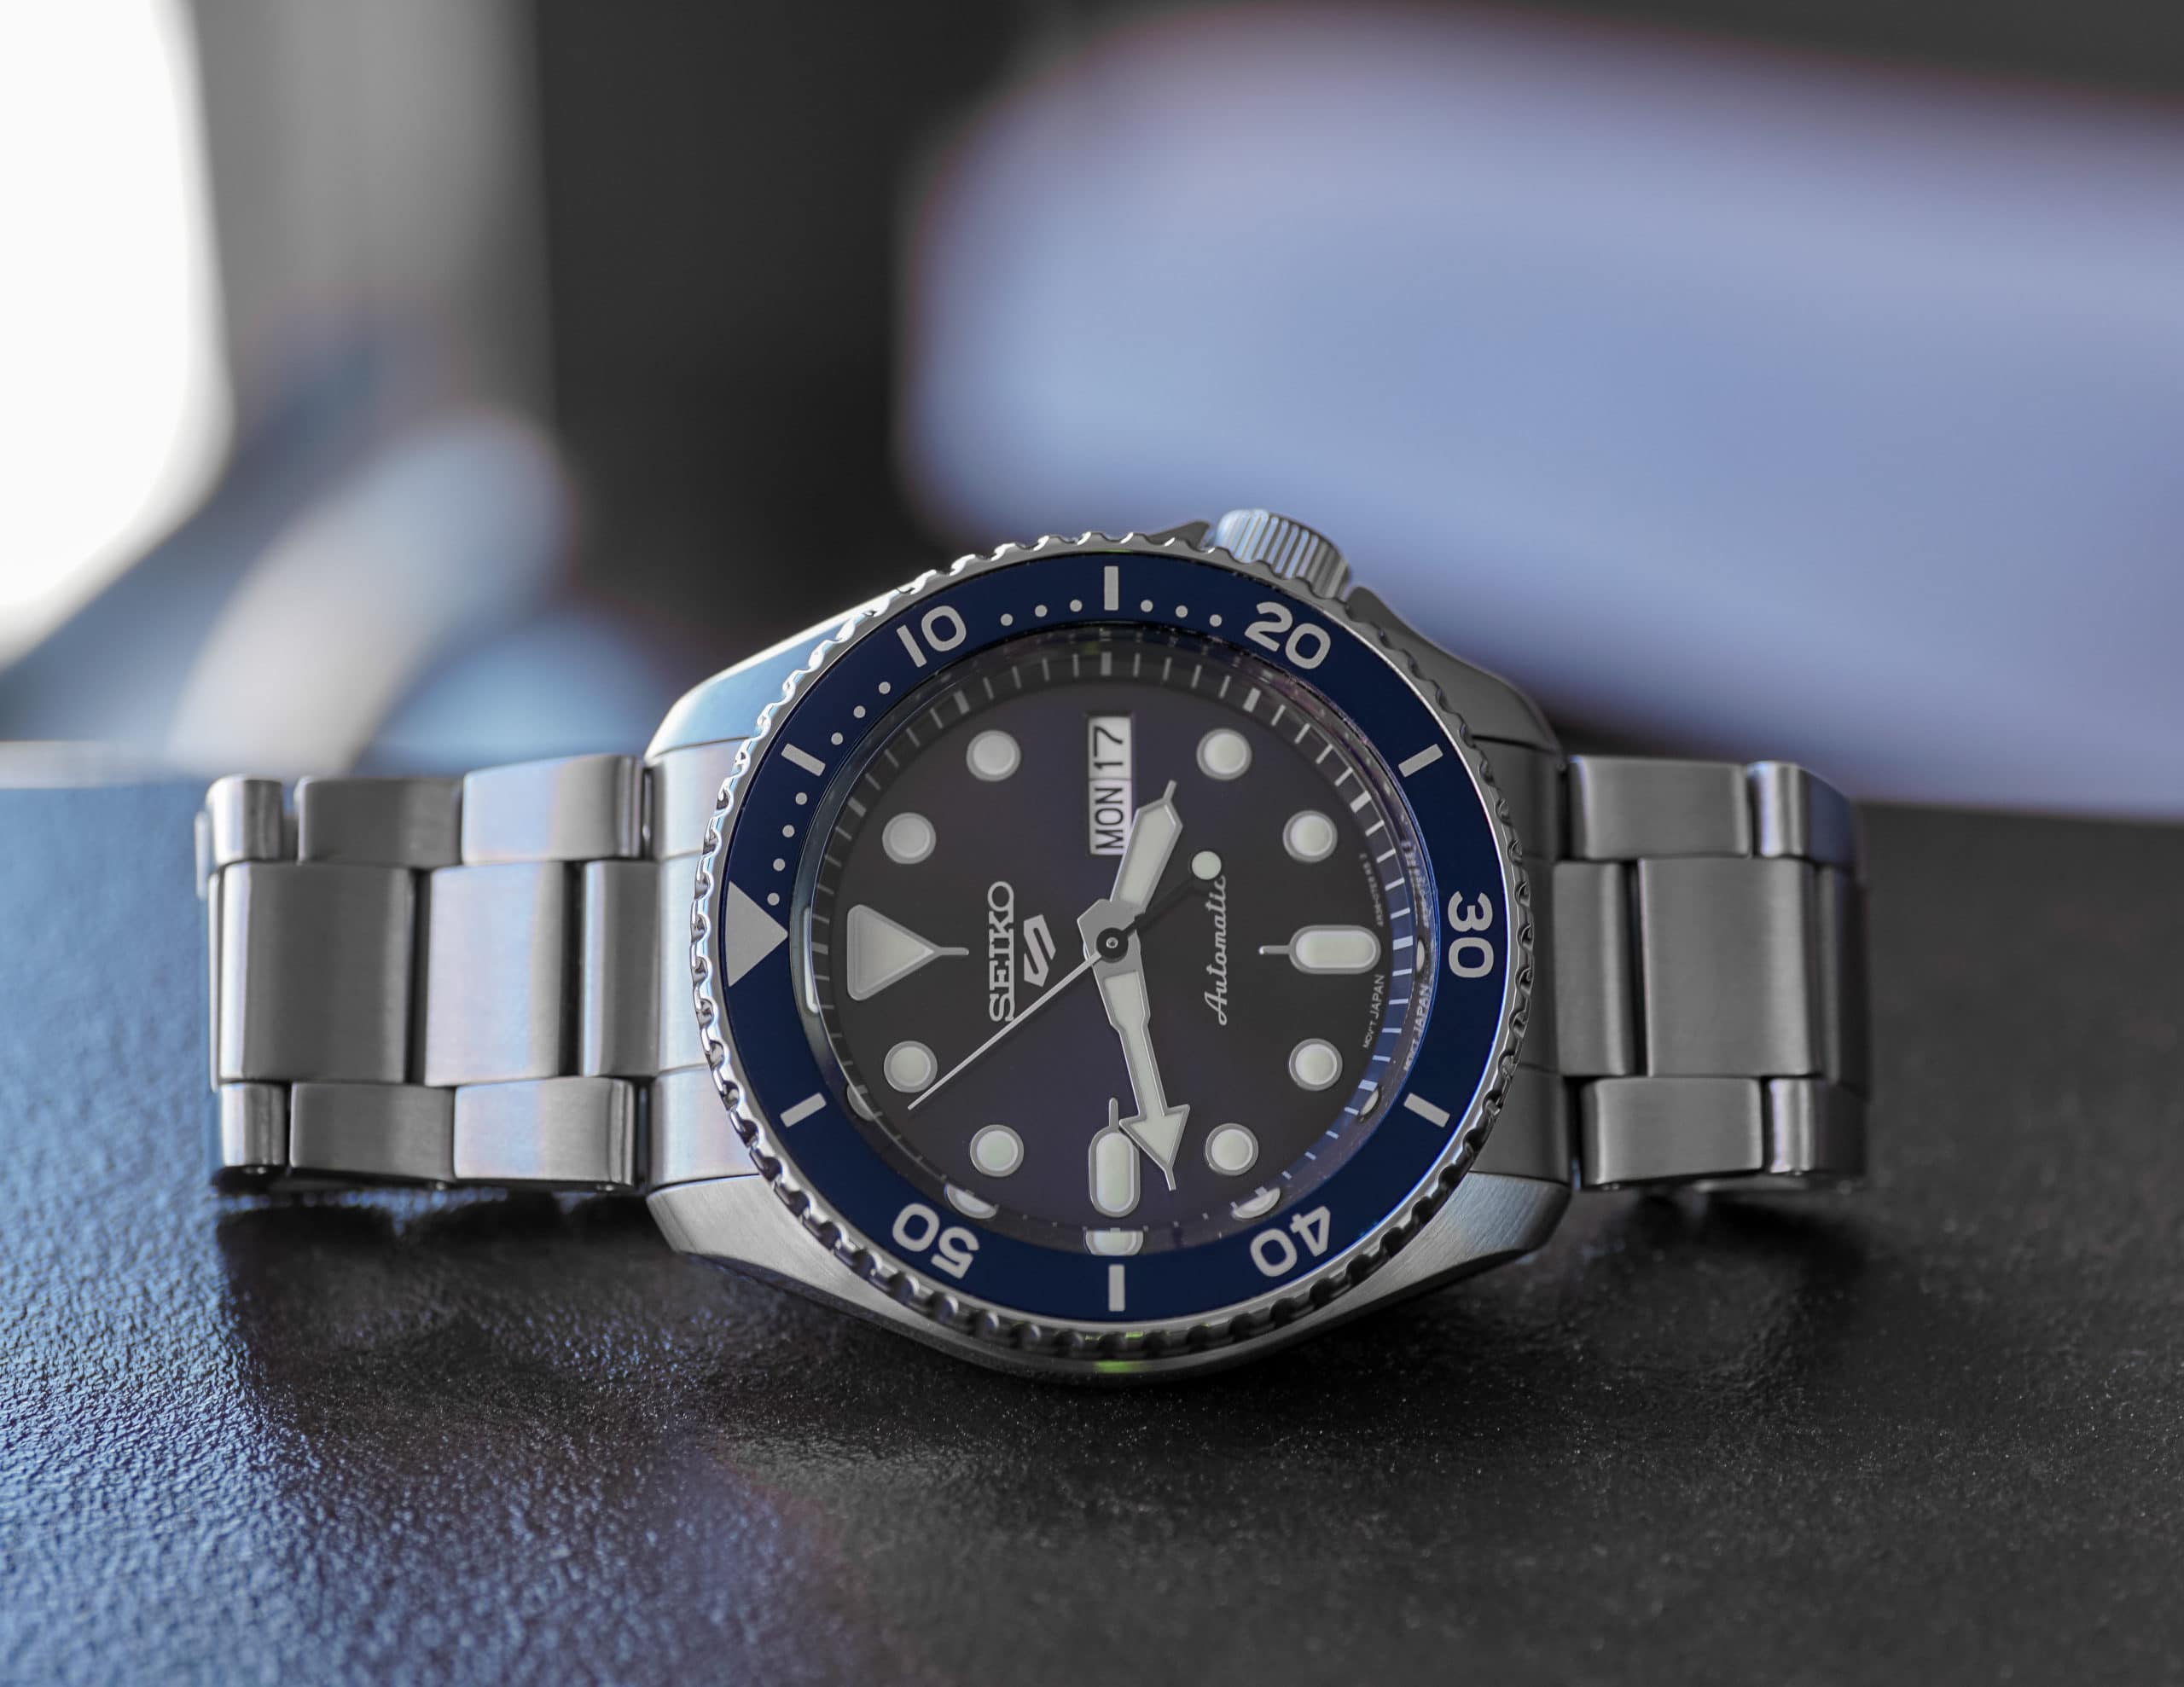 Seiko 5 Sports Review: I Can't Stop Wearing This Super-Affordable Watch